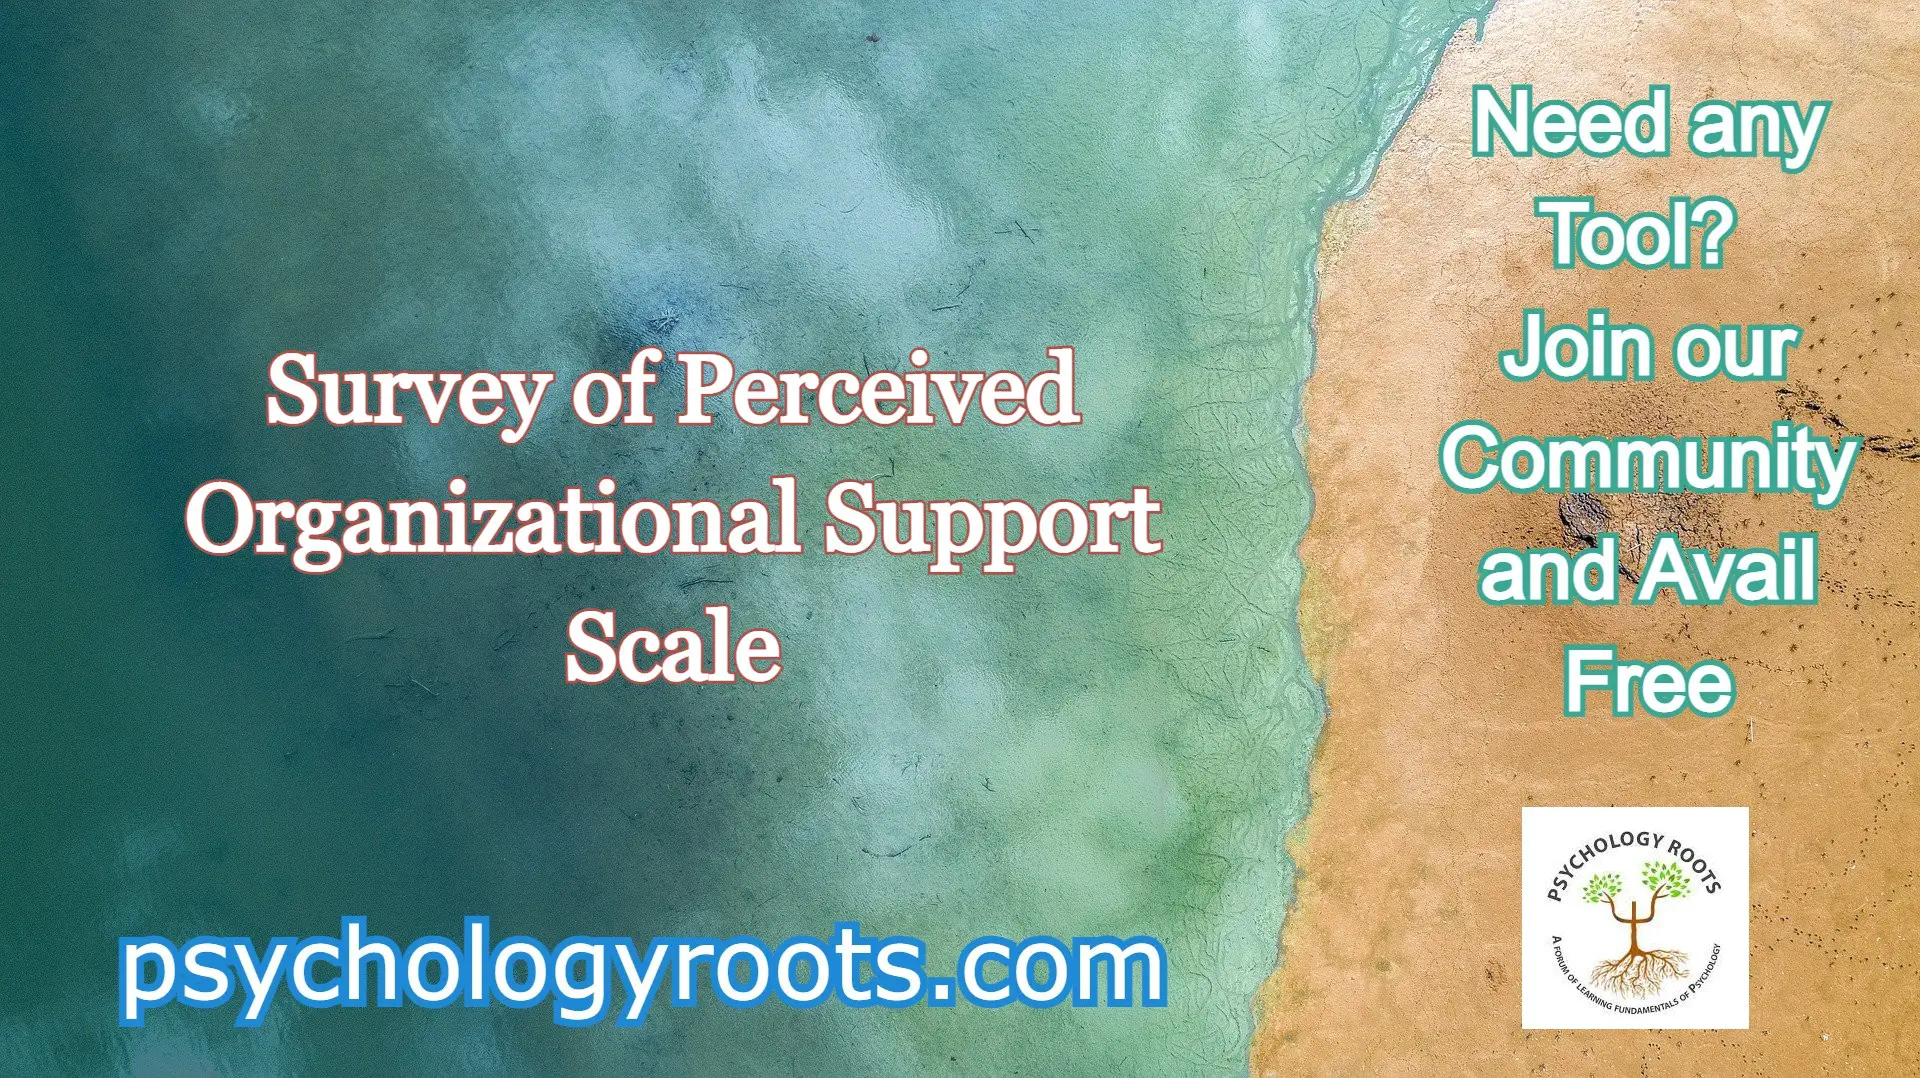 Survey of Perceived Organizational Support Scale